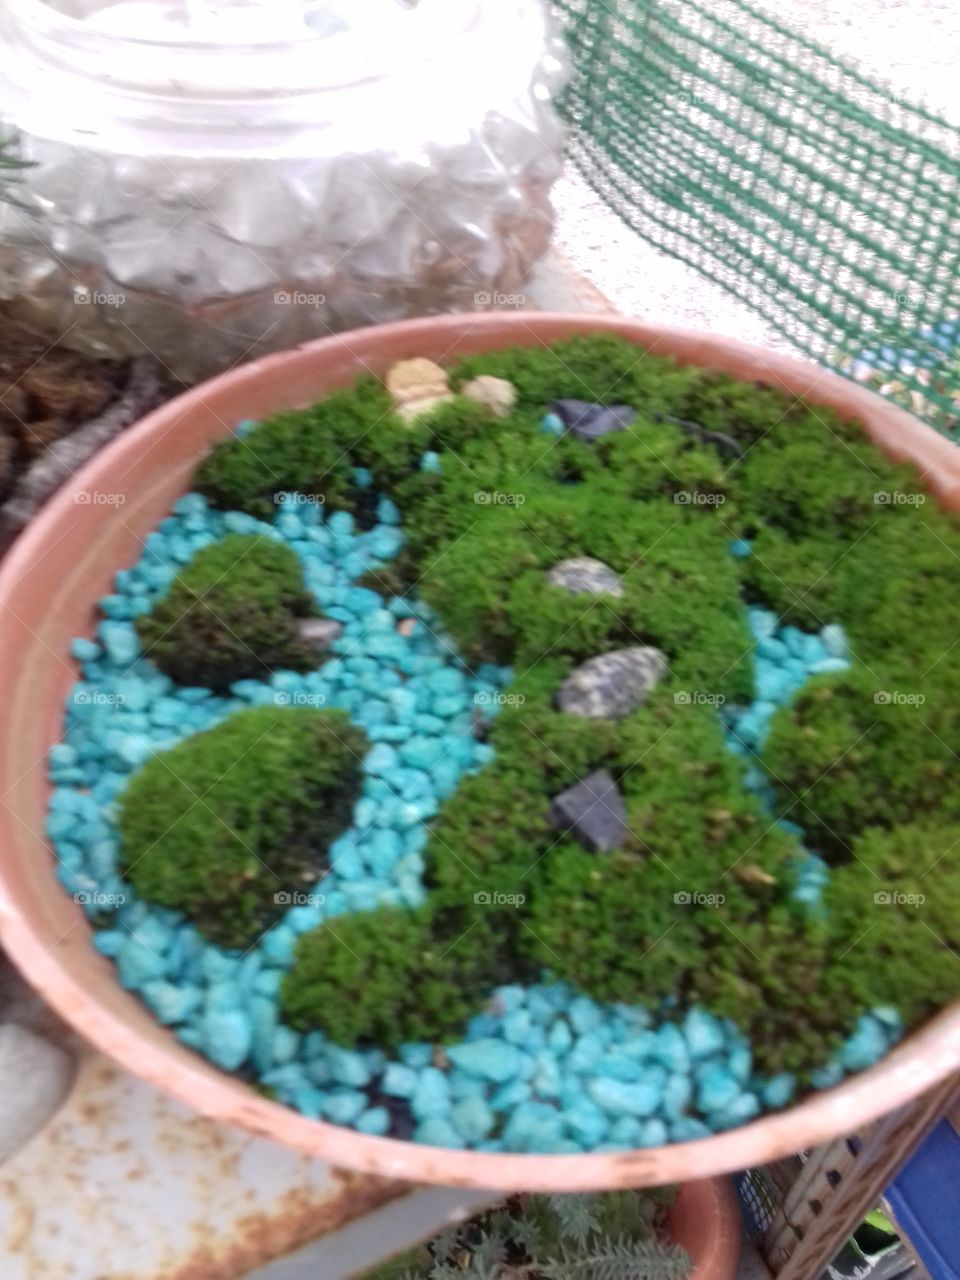 Italy is my country..I made it with moss